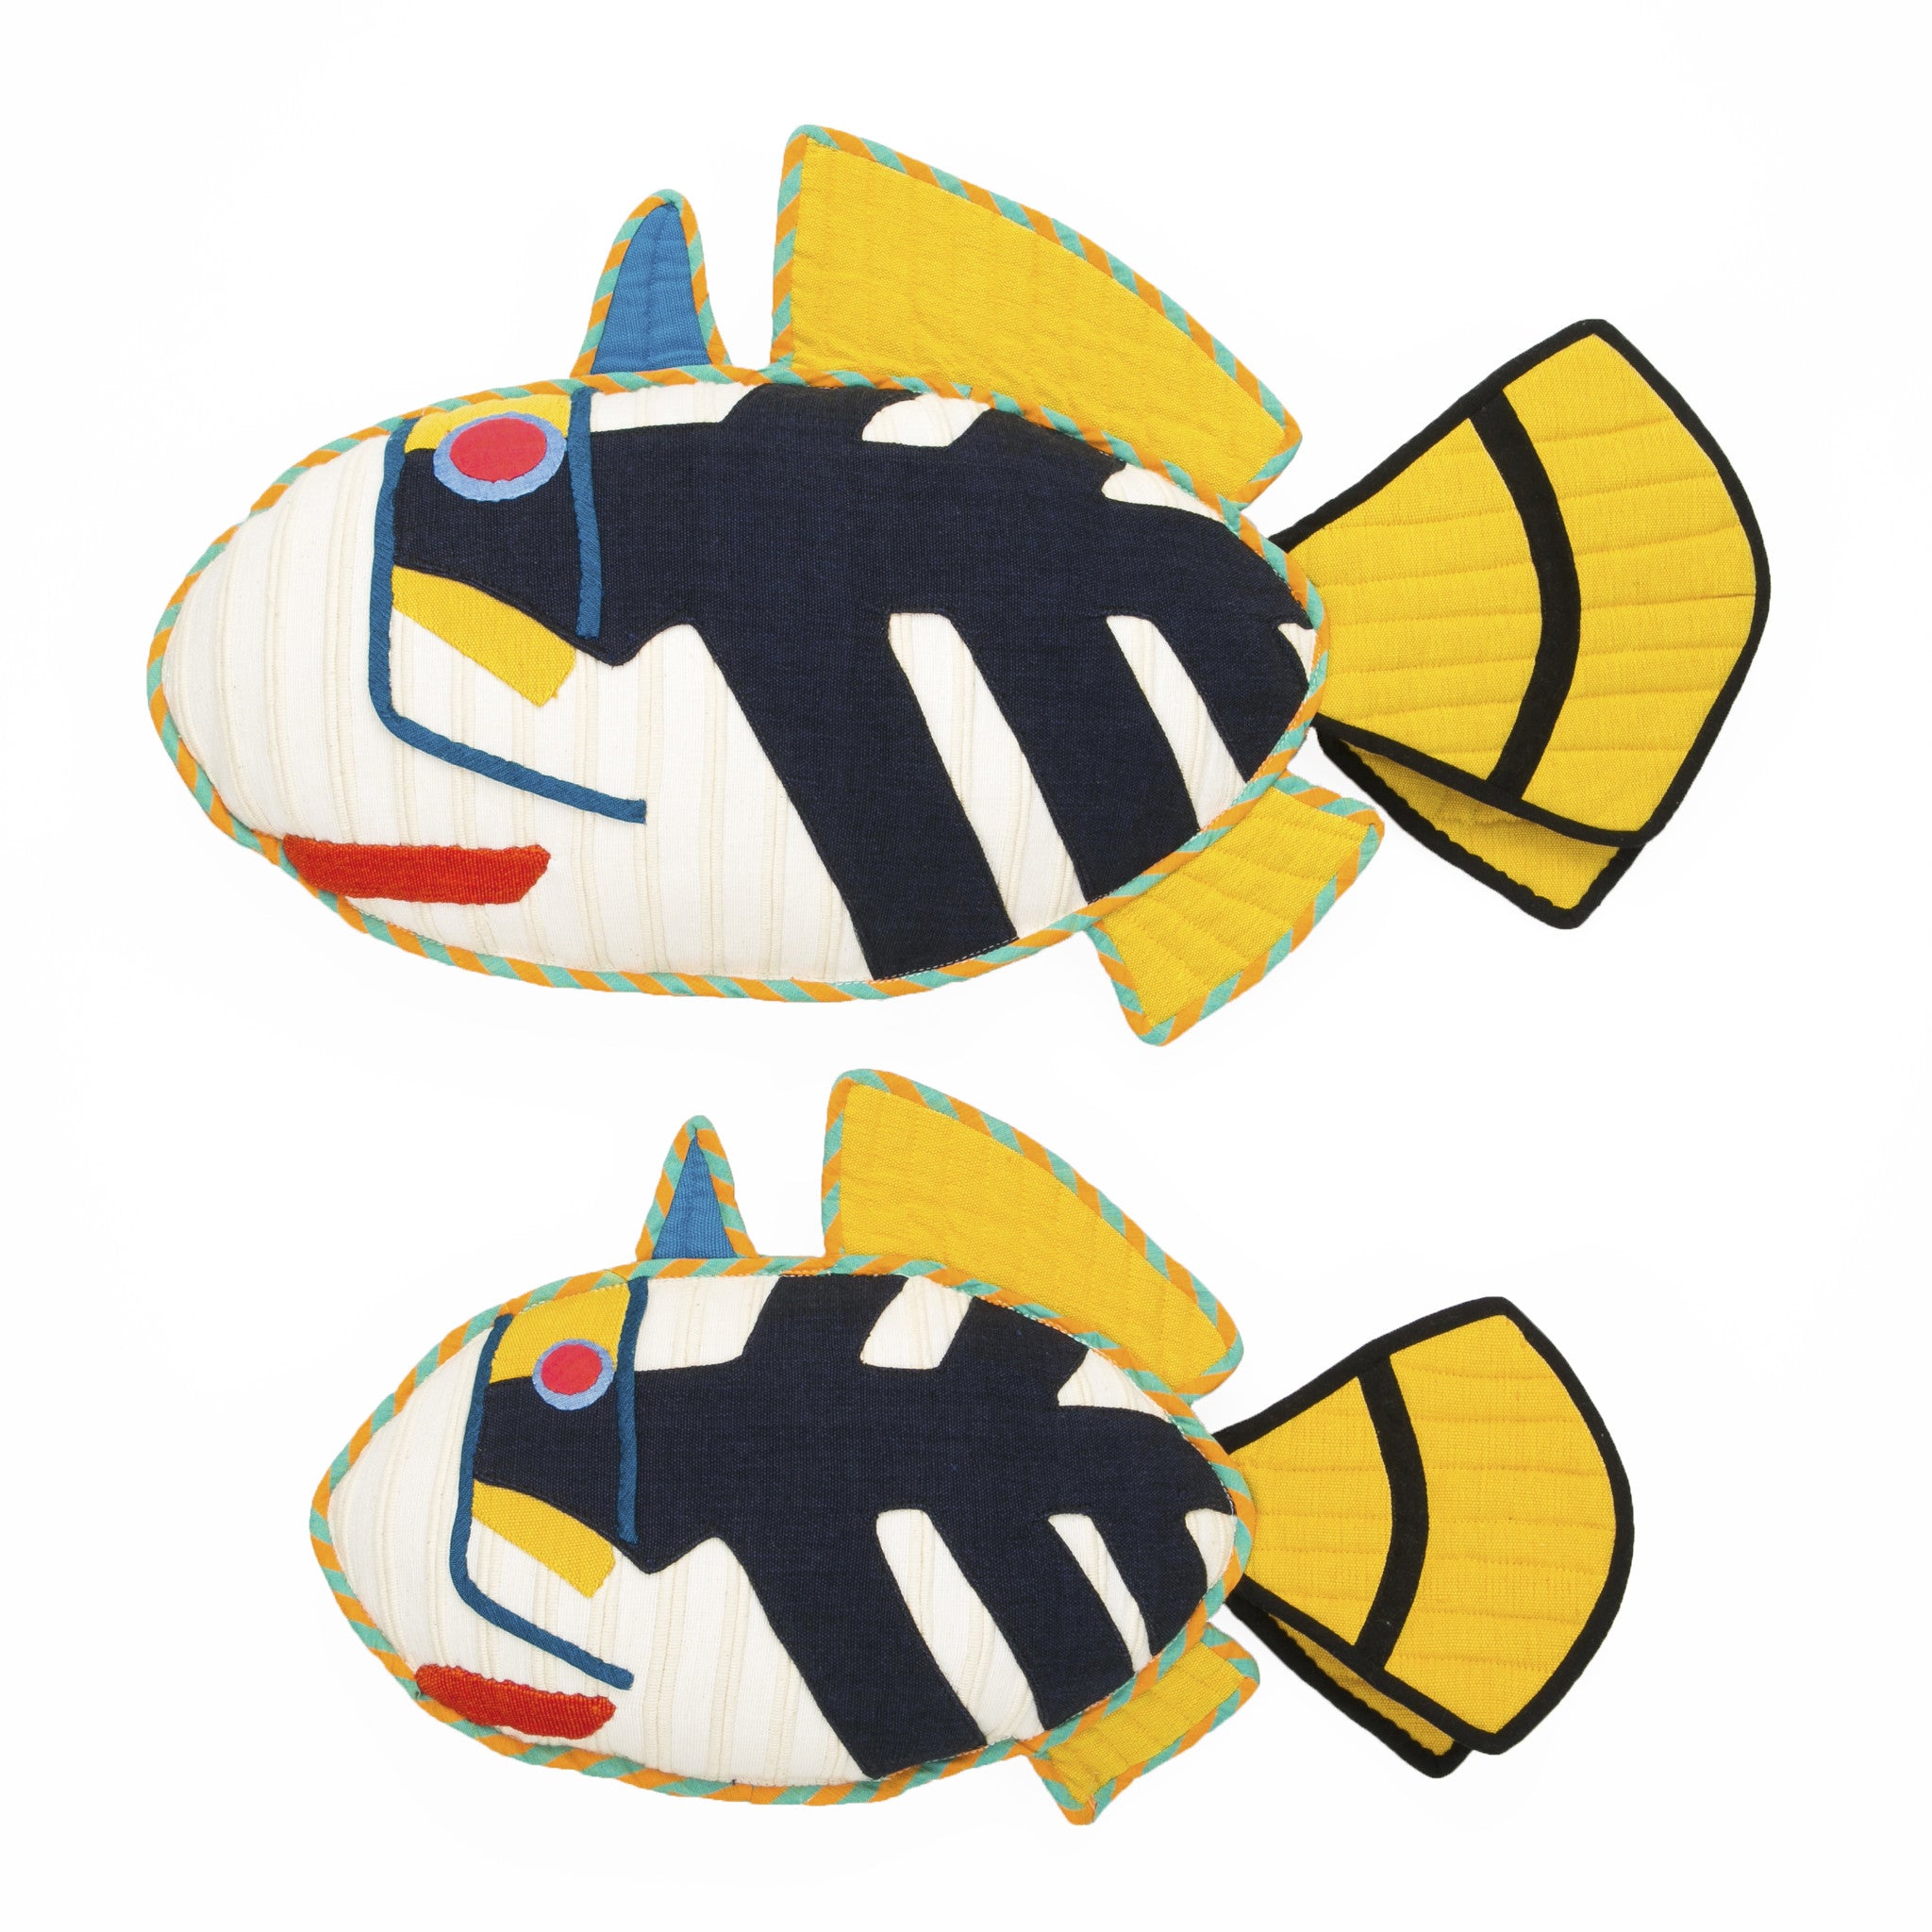 Fish Pillow - Pepper, the Picasso Trigger Fish Pillow by Barefoot